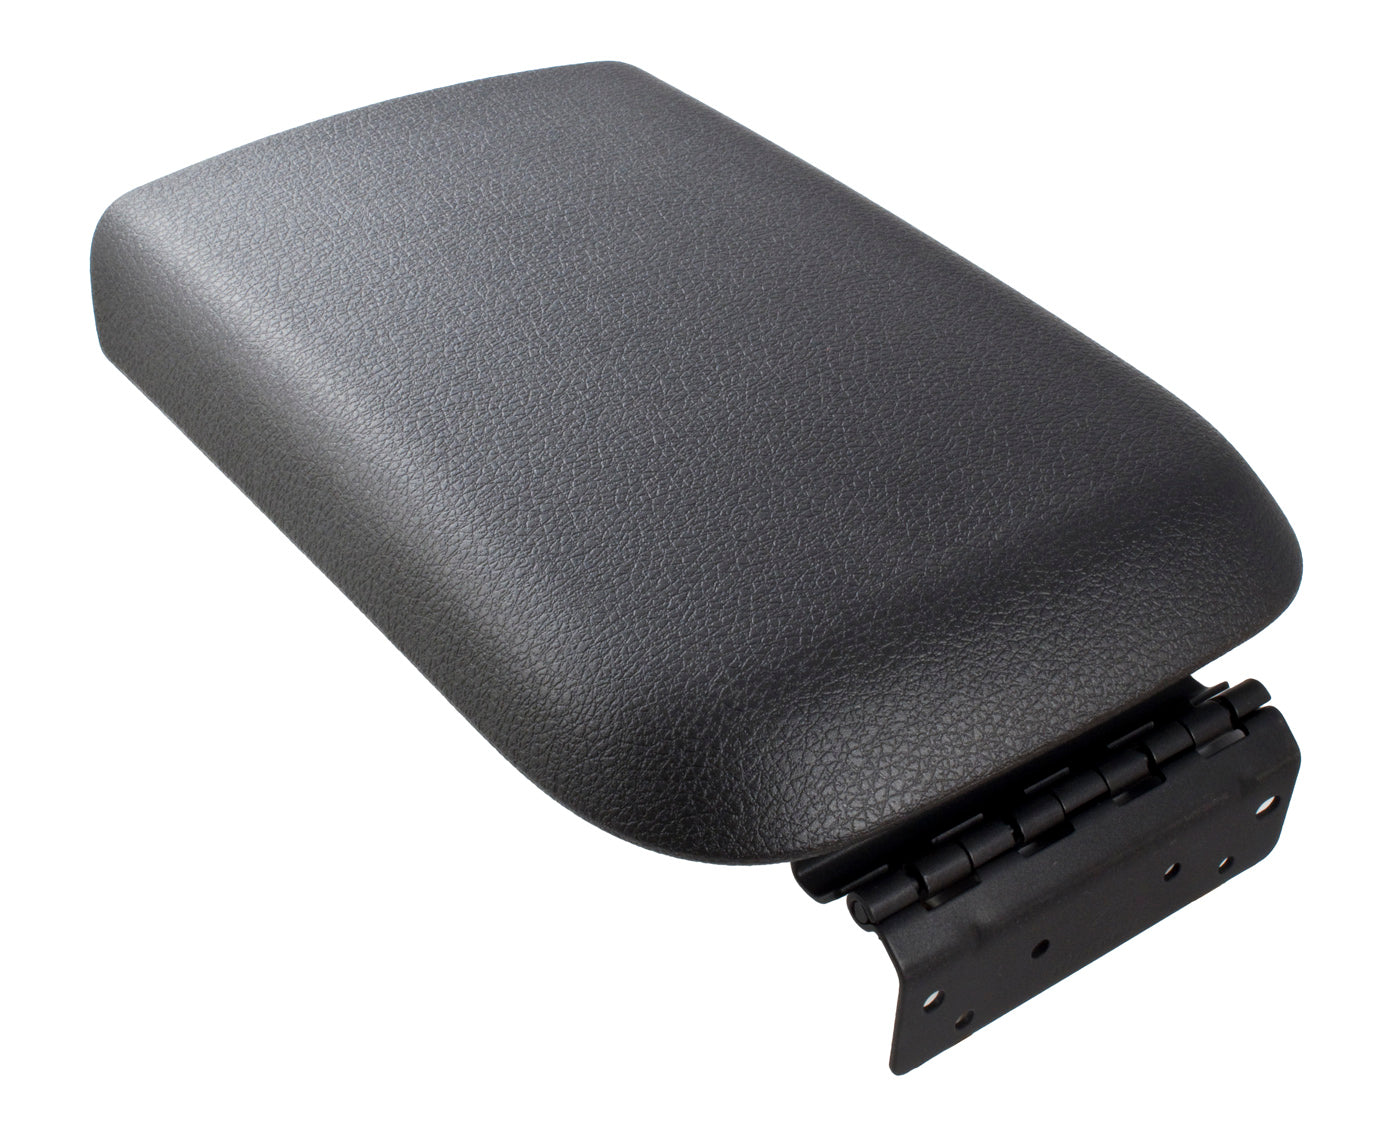 2005-2009 Mustang Genuine Ford OEM Center Console Cover Armrest Pad Lid Black 